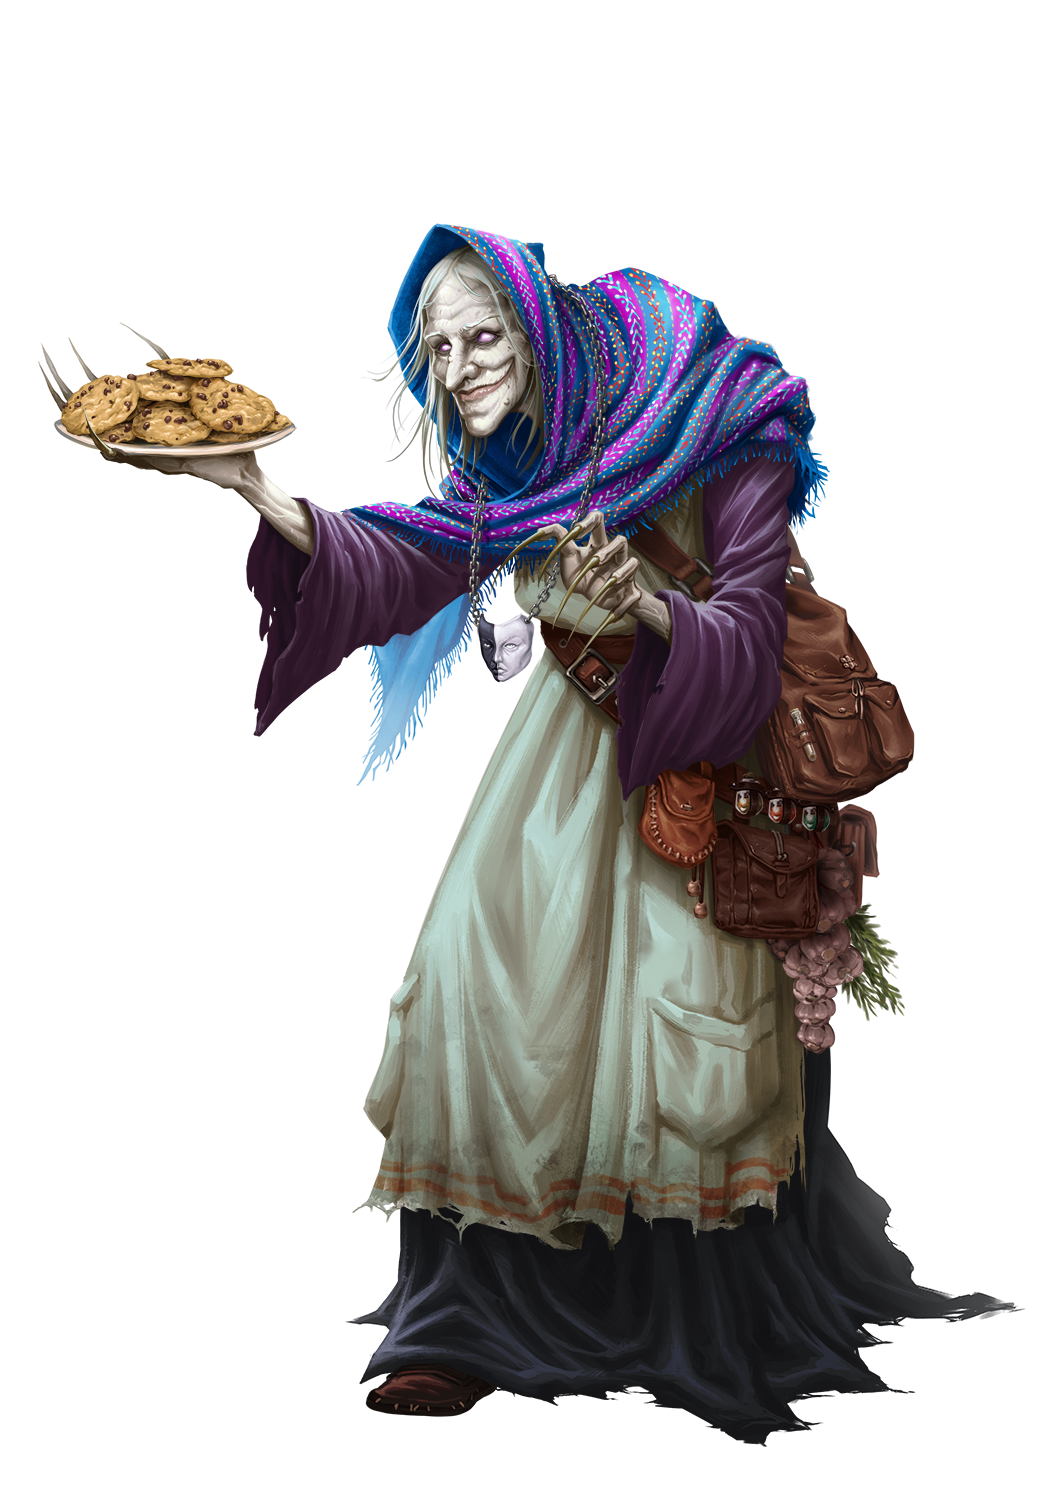 A grandmother from the shadow plane offering you some very normal cookies